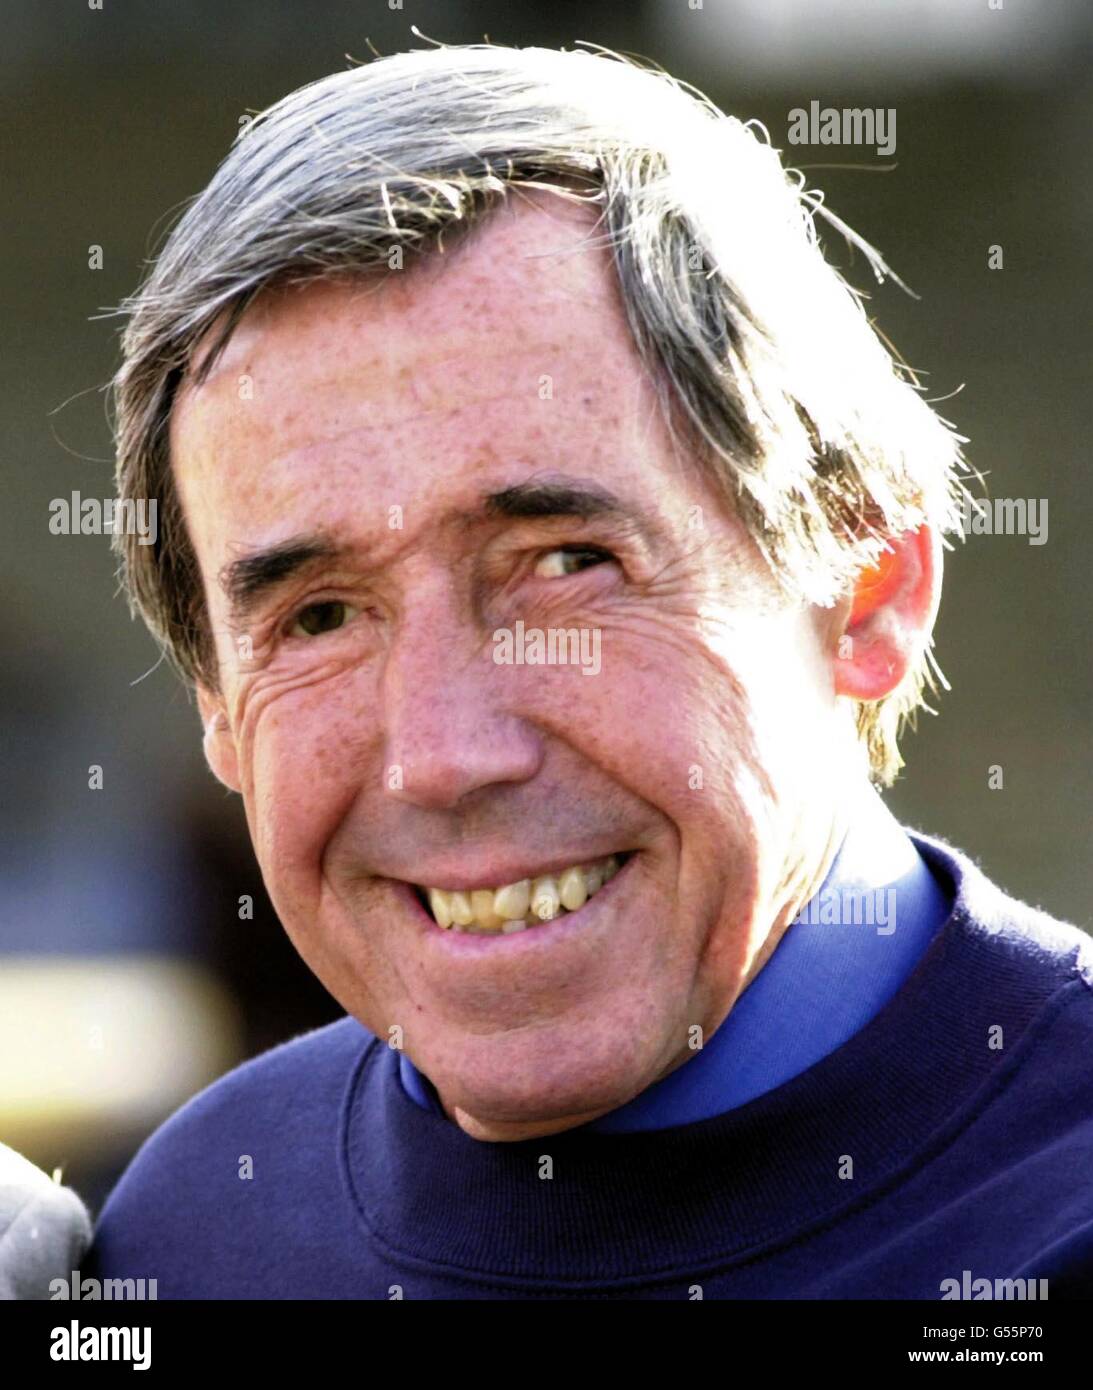 Former football legend, Gordon Banks outside Wembley stadium, North London. Banks will be attending A Salute to Wembley, Final Ball on Thursday with 2,000 invited guests who are hoping to raise 1 million in aid of the NSPCC FULL STOP Campaign. * 7/3/01: Legendary keeper Banks is to auction off his 1966 World Cup winning medal. The England star played in the side that beat the former West Germany 4-2 at Wembley to win football's greatest prize. Experts believe that the medal will fetch between 70,000 and 90,000 at the auction to be held at Christie's in London. Bidders will be able to try to Stock Photo